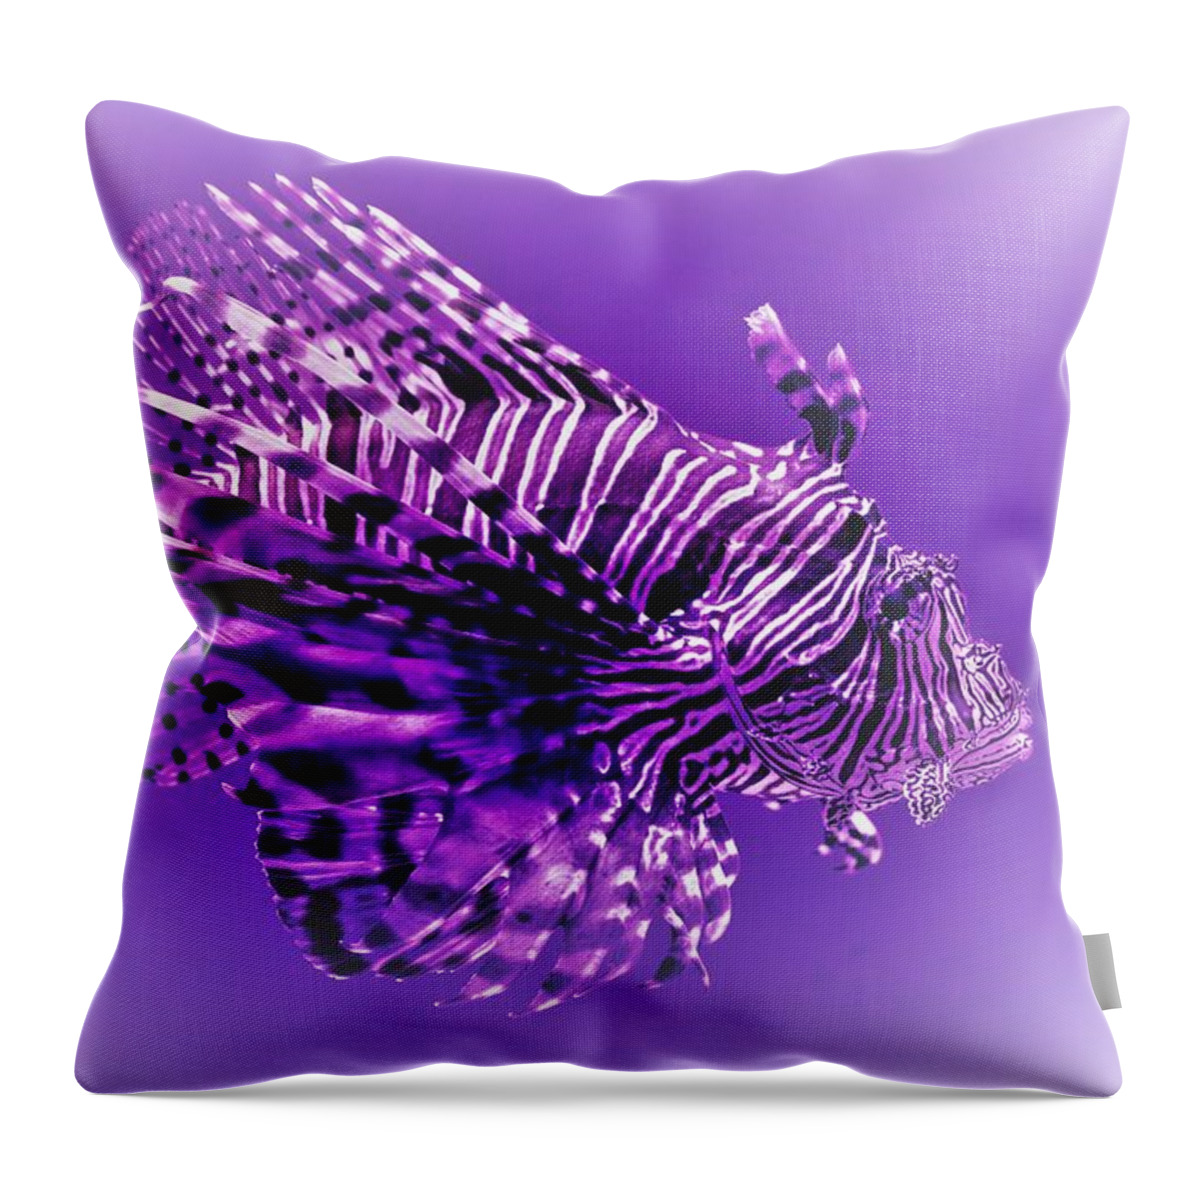 Lion Fish Throw Pillow featuring the photograph Purple Lionfish by Lucie Dumas